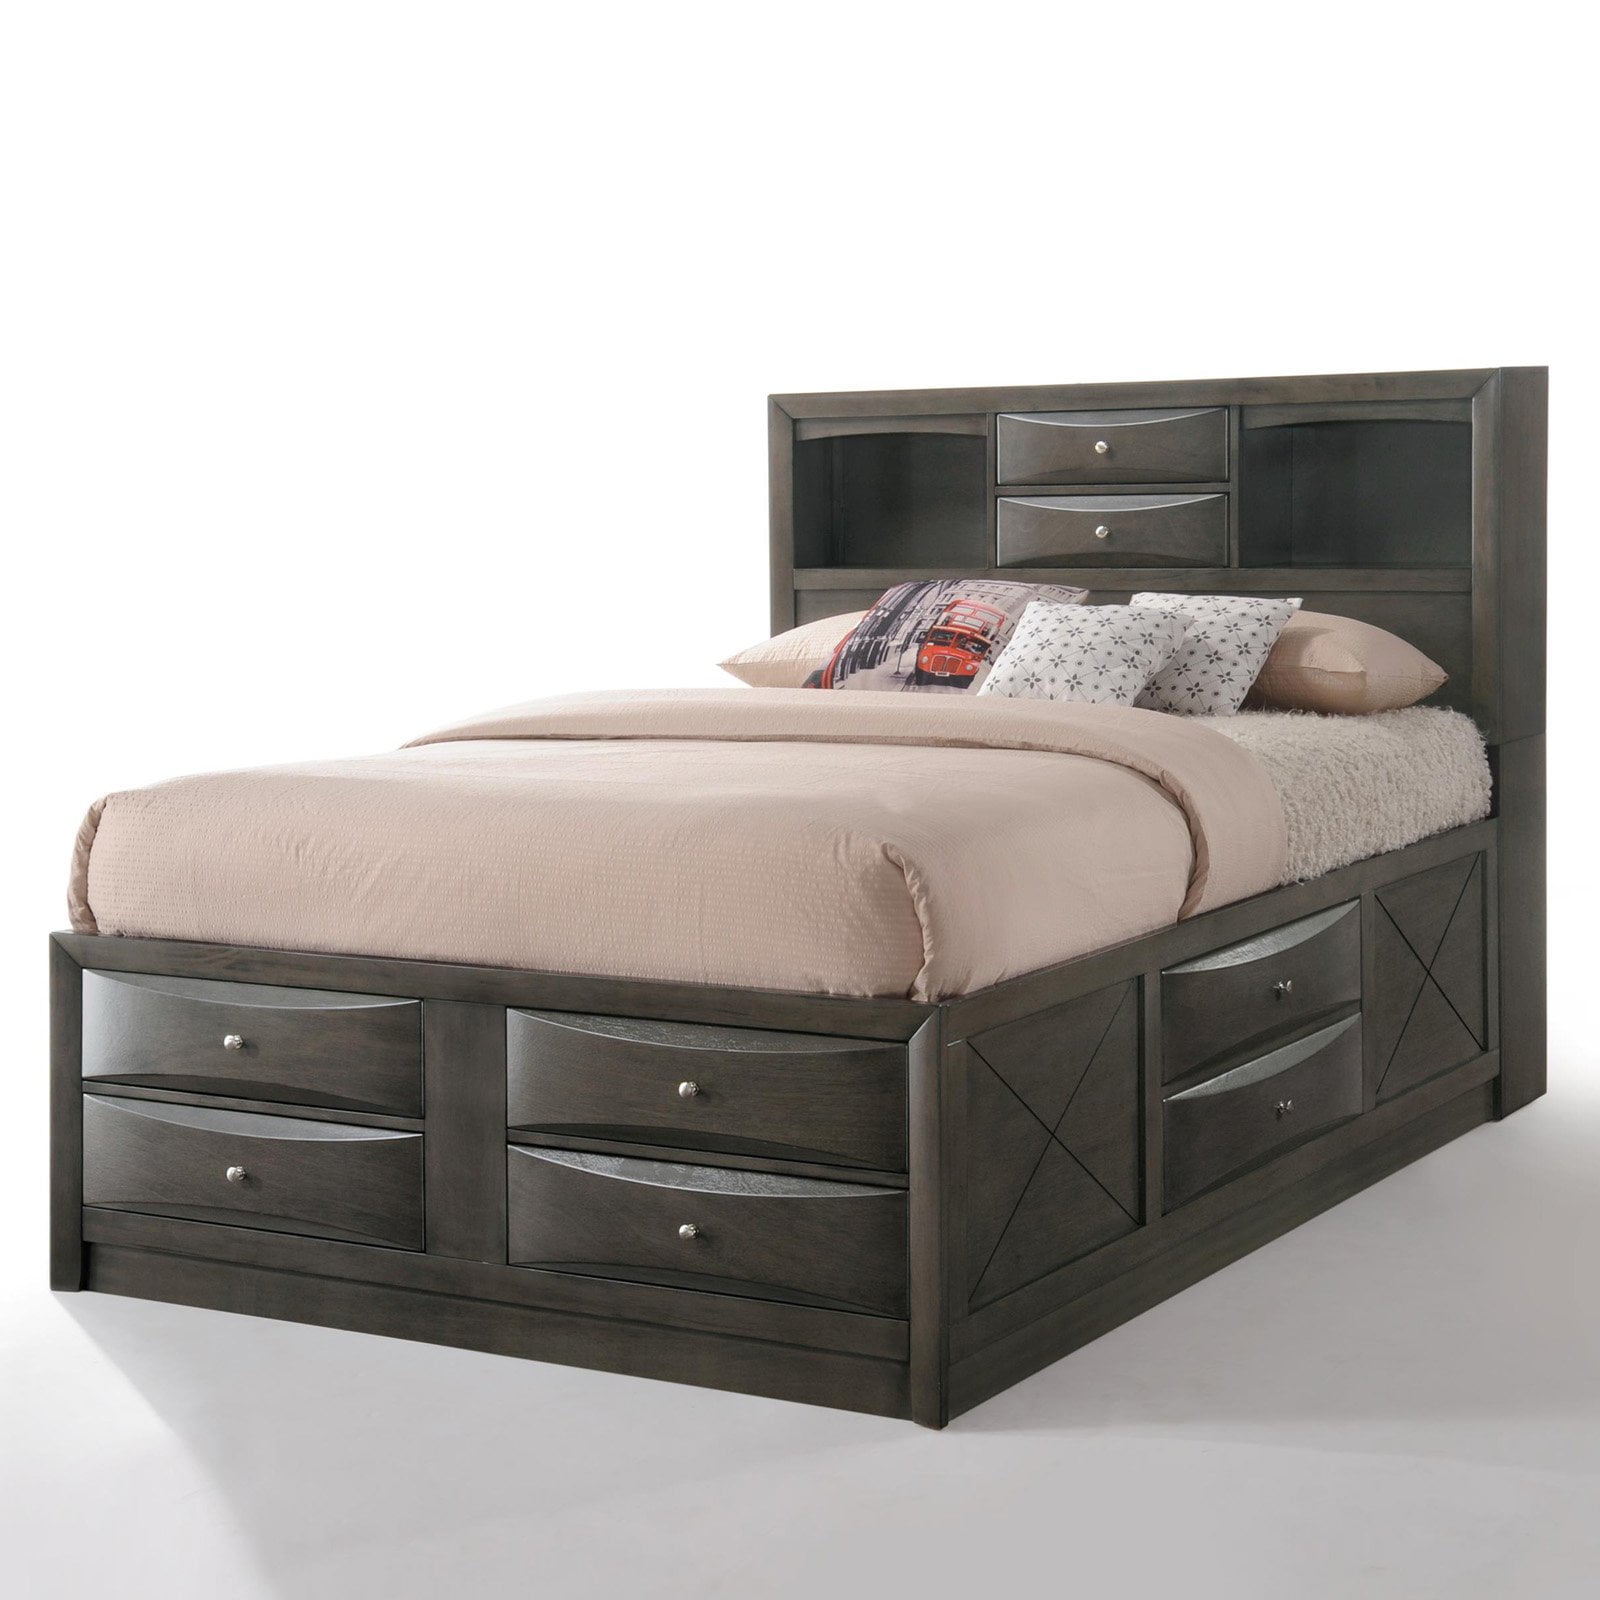 Picture of ACME 22696EK Ireland Eastern King Size Bed with Storage - Gray Oak, 4 Piece